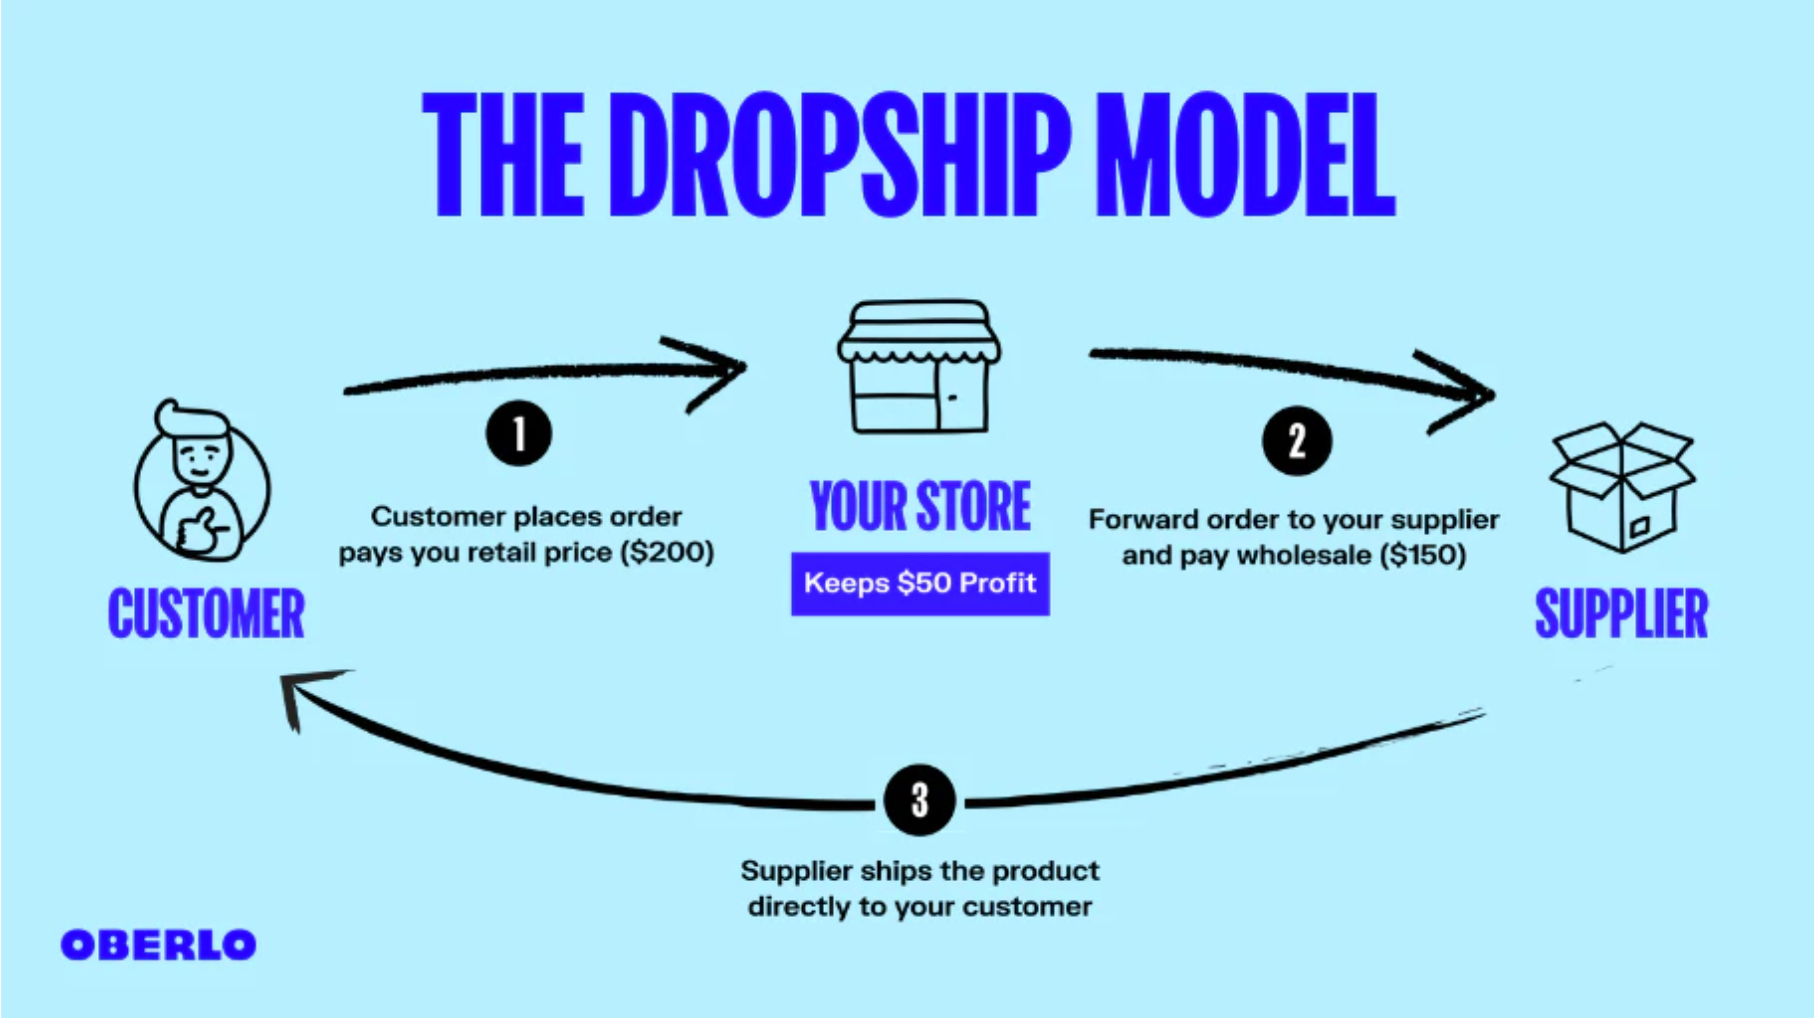  dropshipping, affiliate marketing, business model, affiliate website, online store, affiliate marketers, own website, dropshipping business model, marketing costs, business models, affiliate marketing pros, successful affiliate marketers, money online, affiliate marketing business model, manage customer support, dropshipping suppliers, affiliate networks, profitable business model, low risk business model, own brand, most affiliate programs, dropshipping store, online business model, profit margins, retail price, passive income, provide customer support.